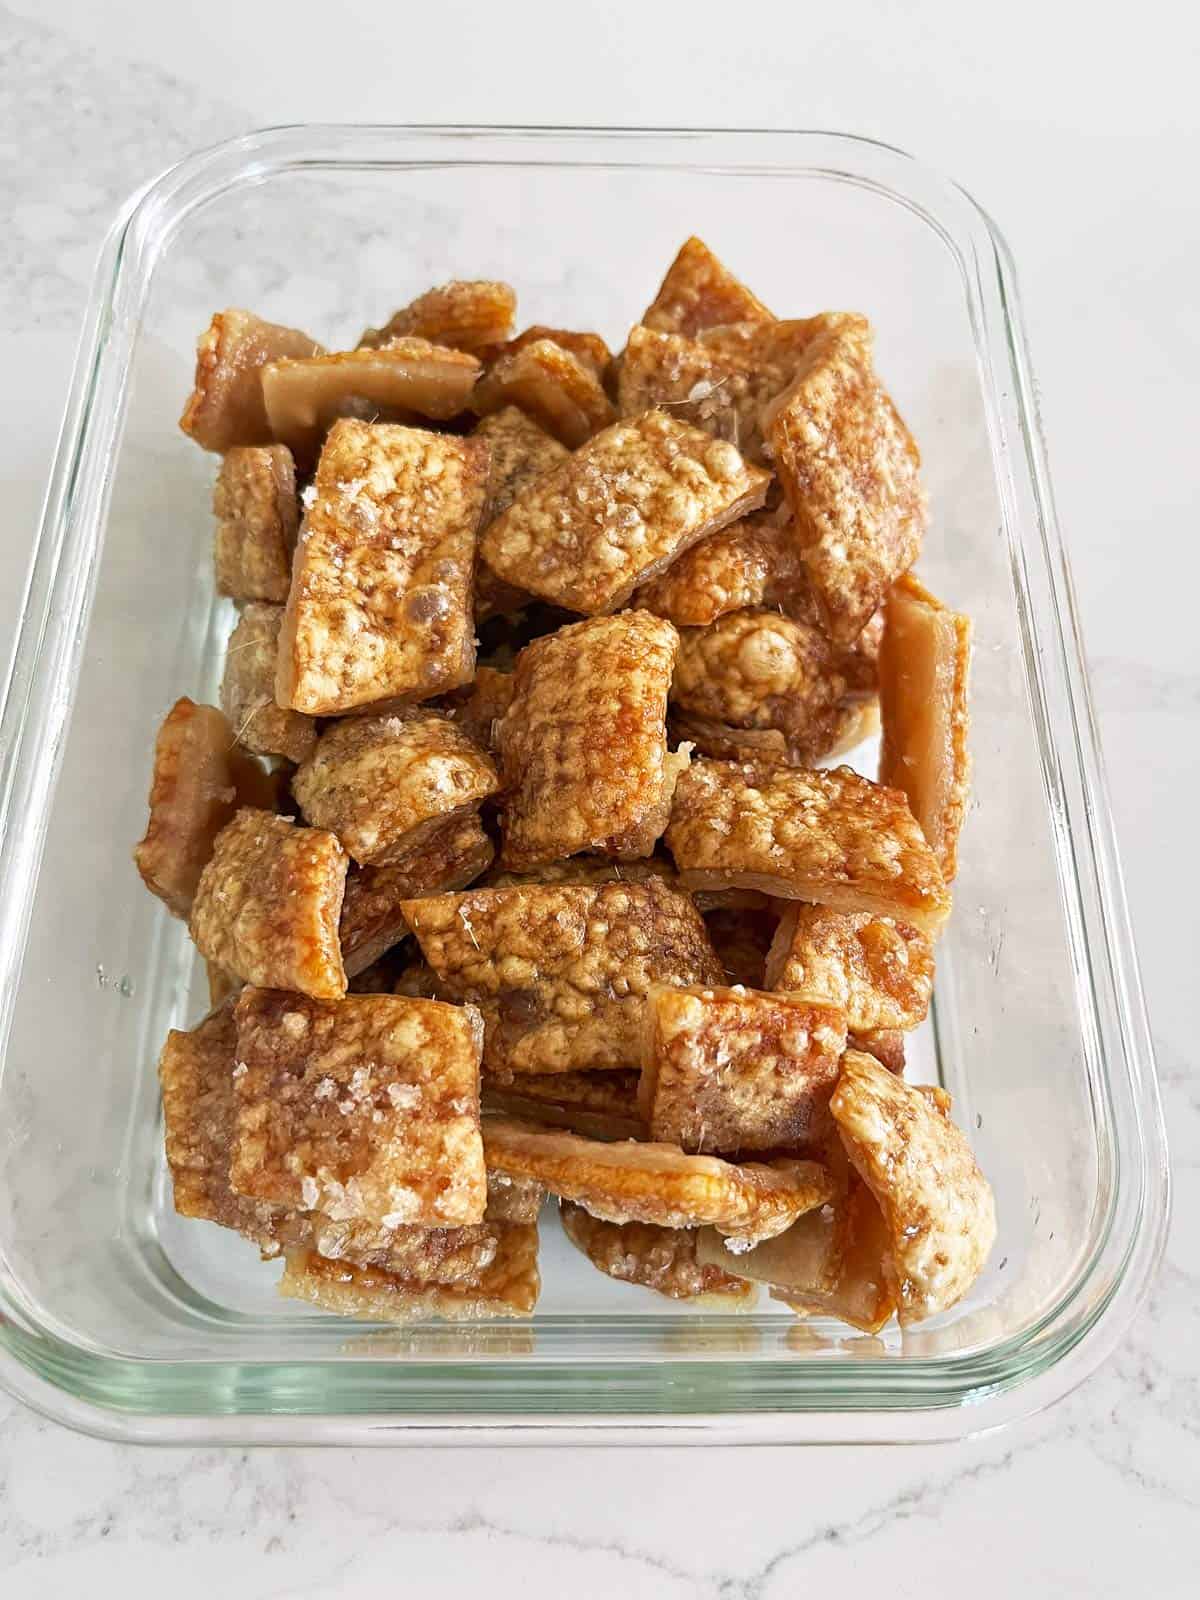 Storing pork rinds in a glass food storage container.